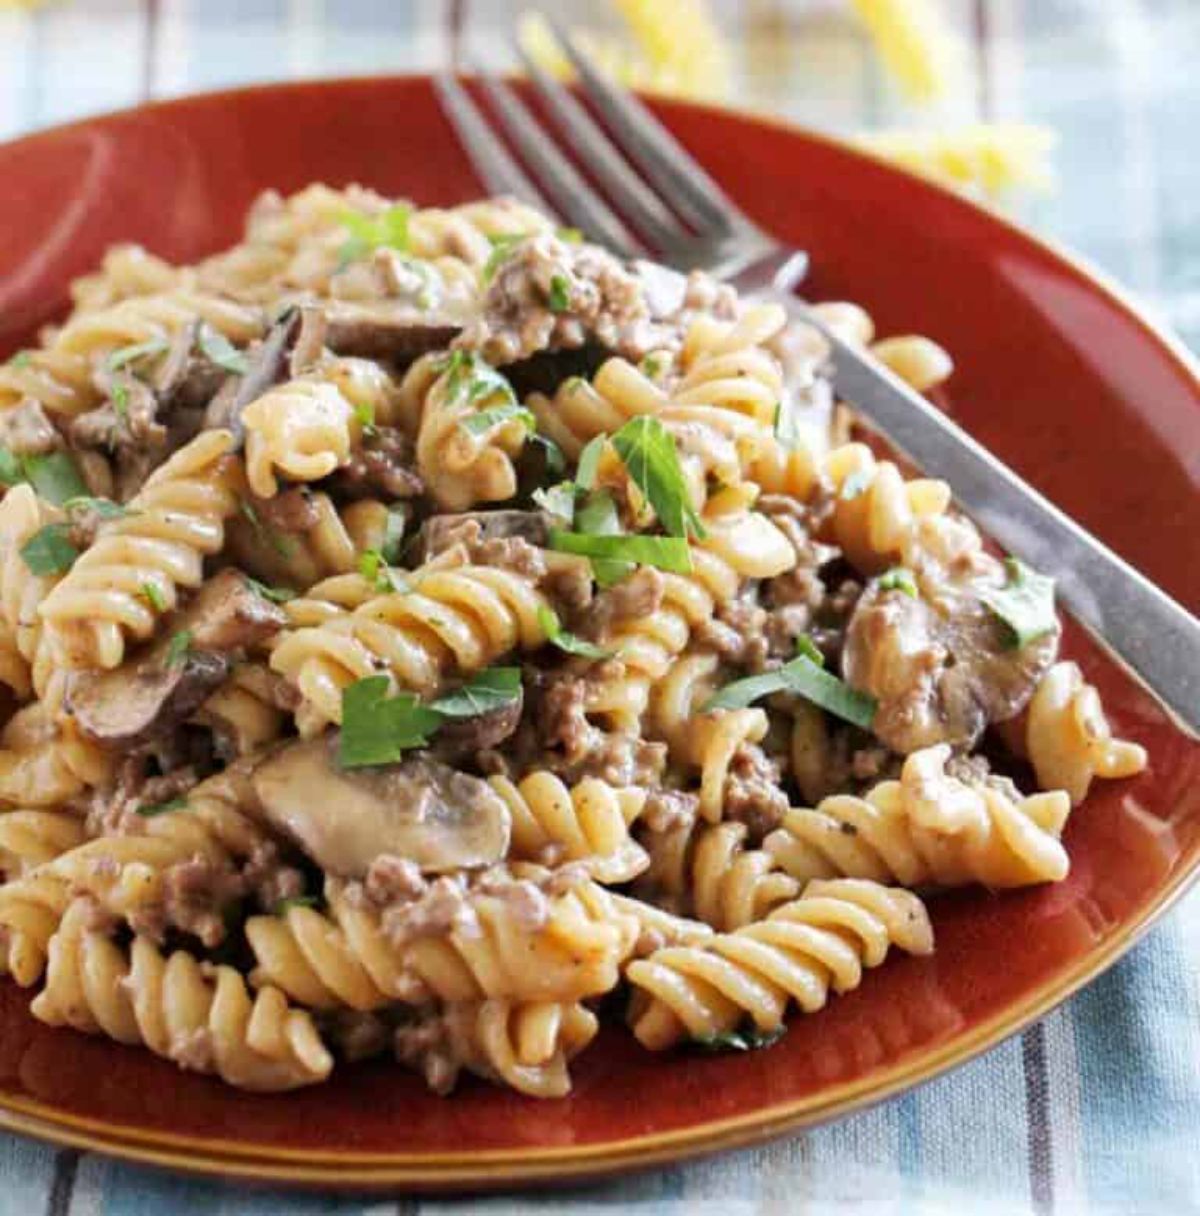 Delicious beef stroganoff on a red plate with a fork.